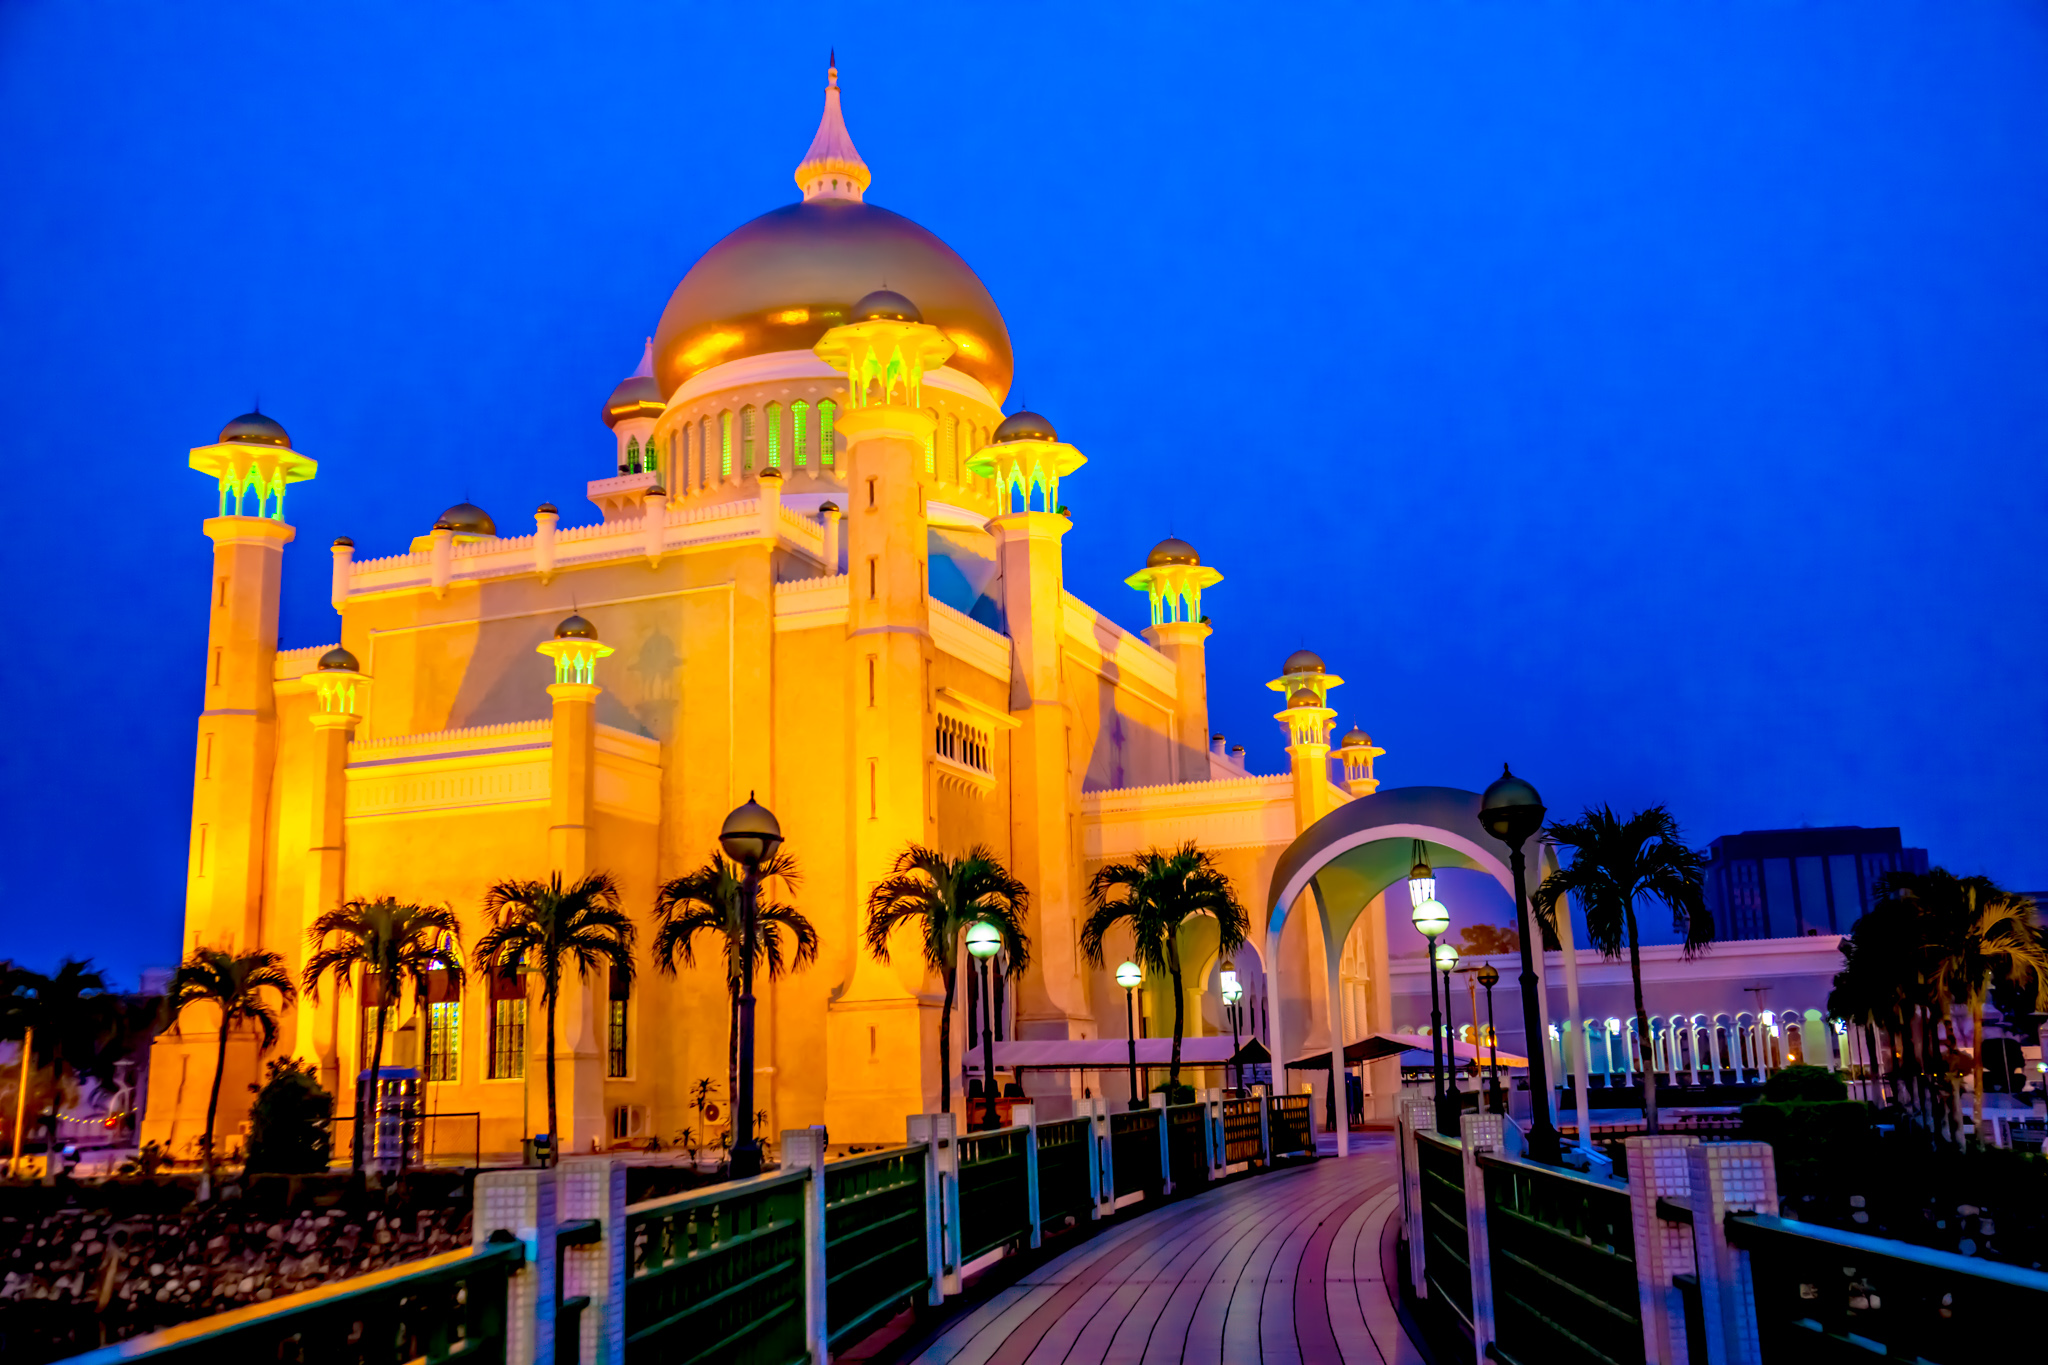 Brunei Old Mosque featured image